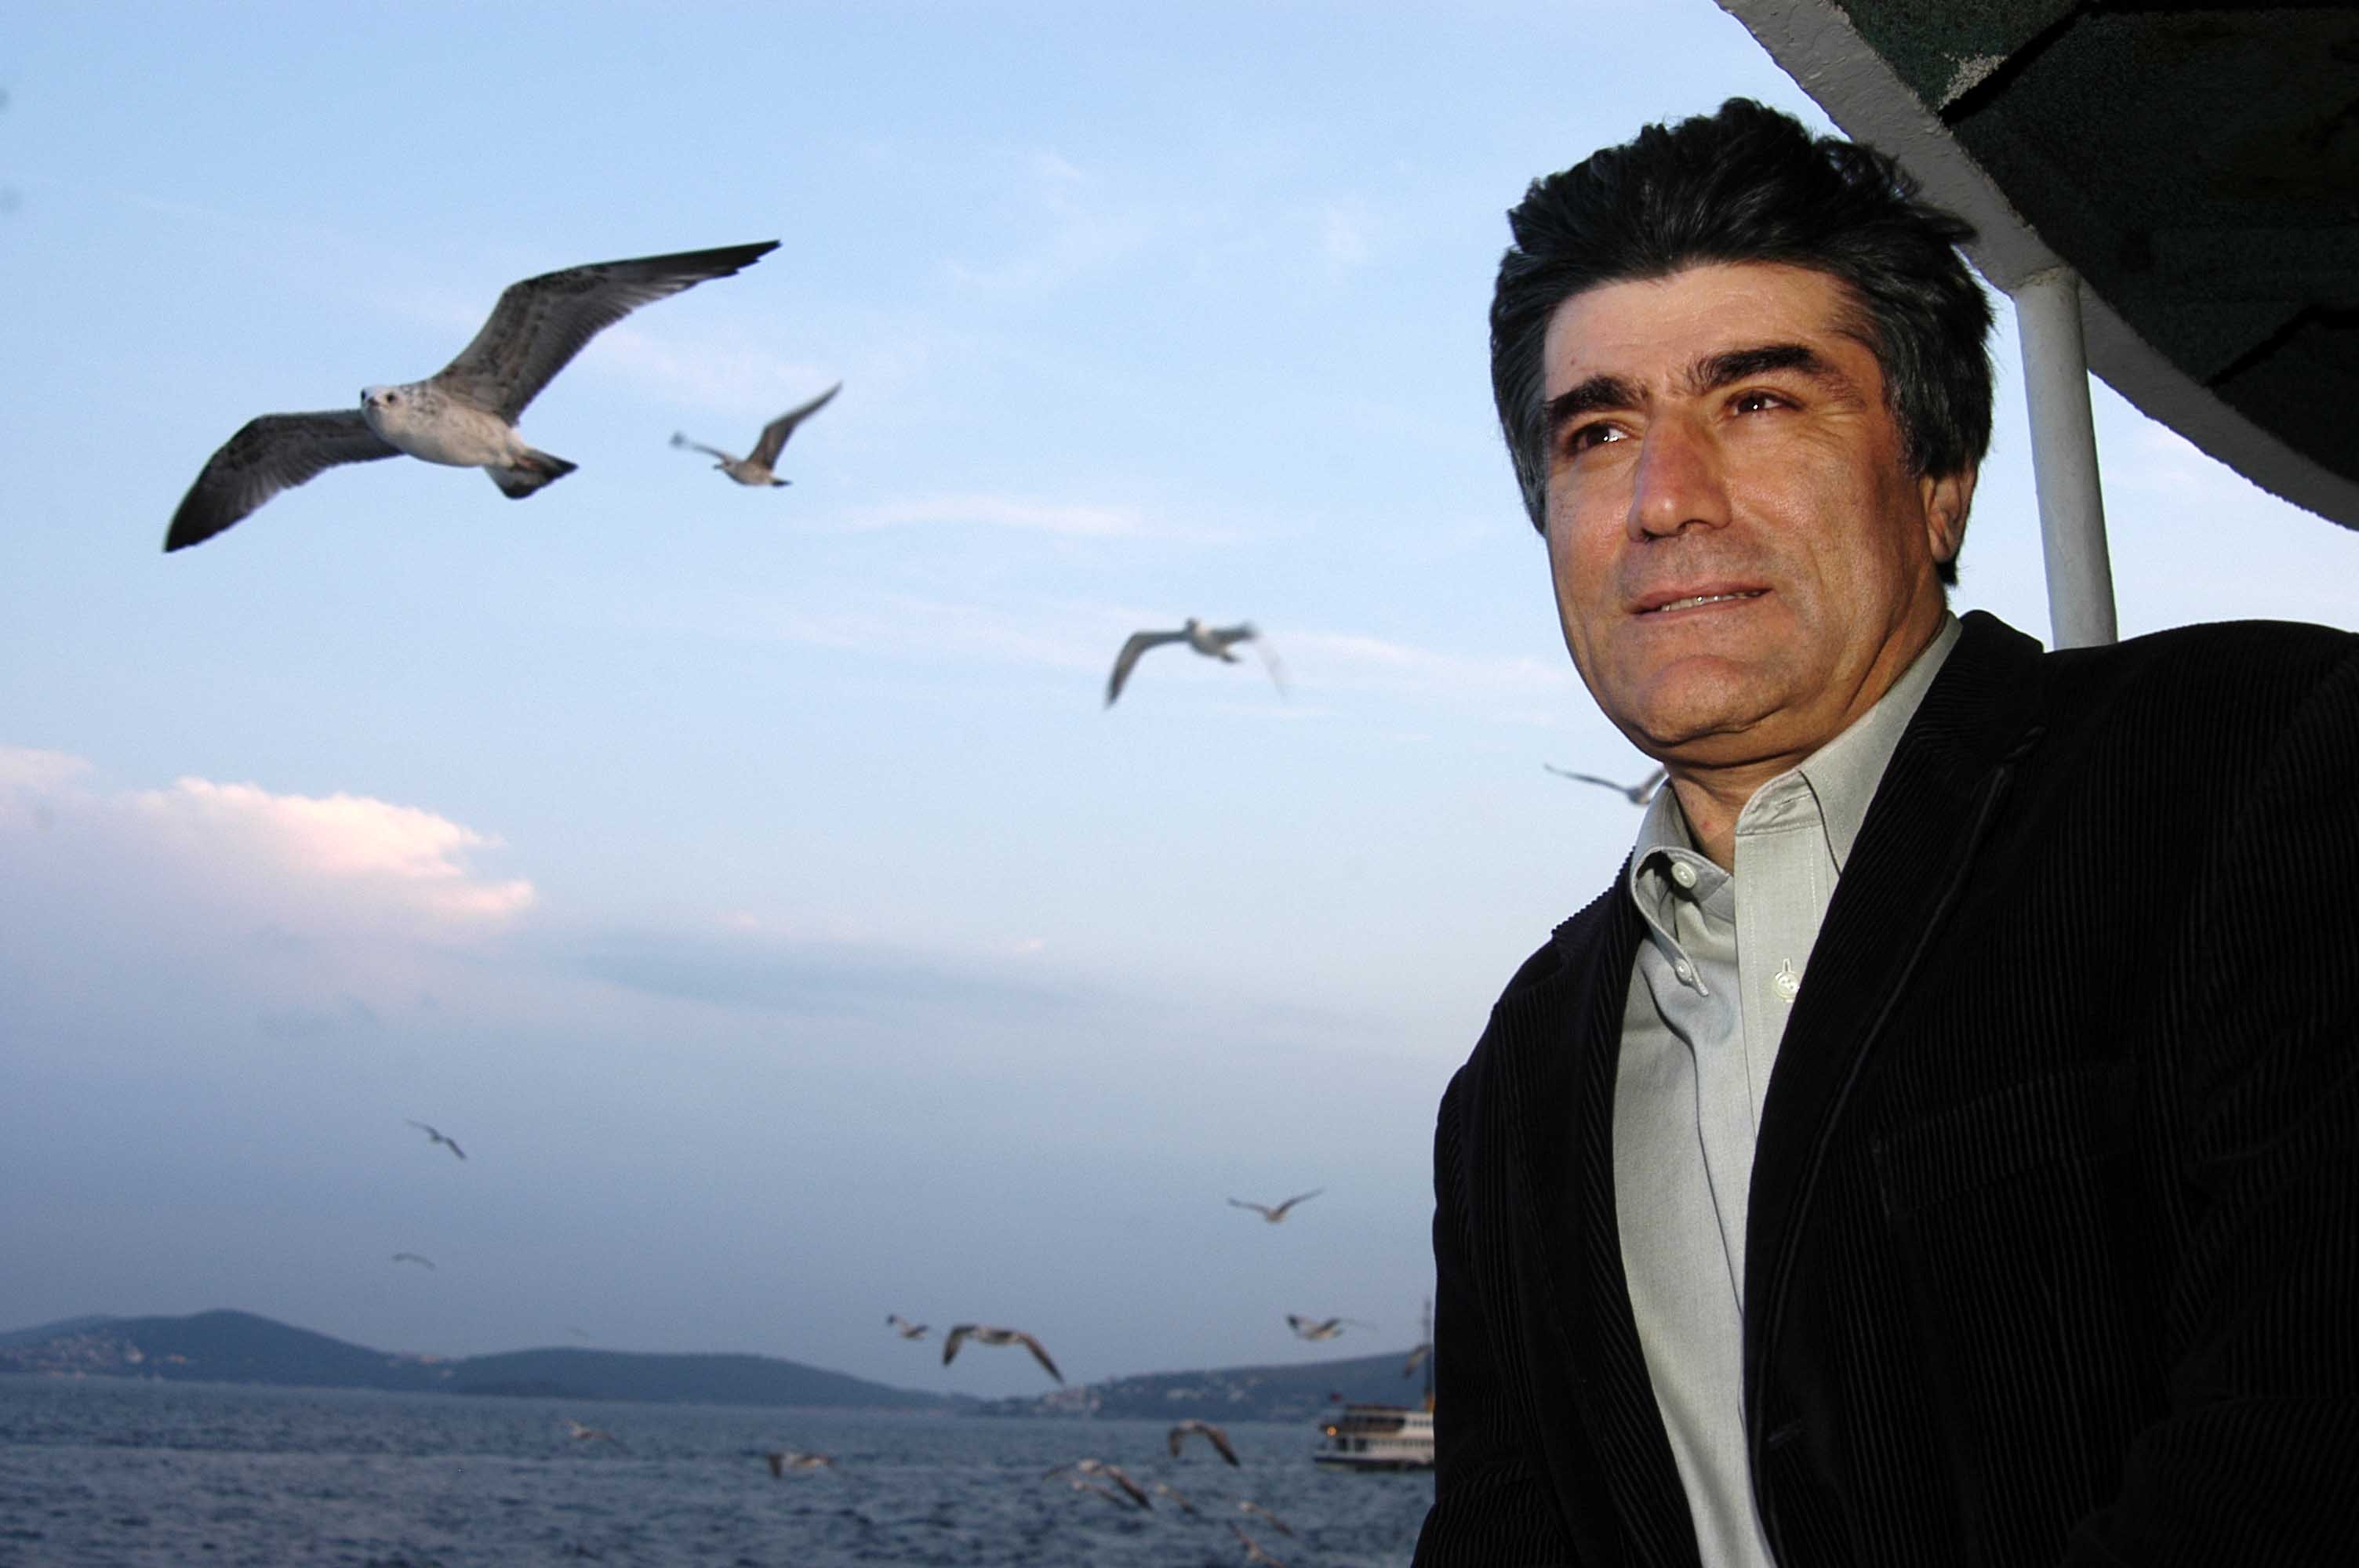 White Pigeon of Turkey – Hrant Dink, would turn today 60